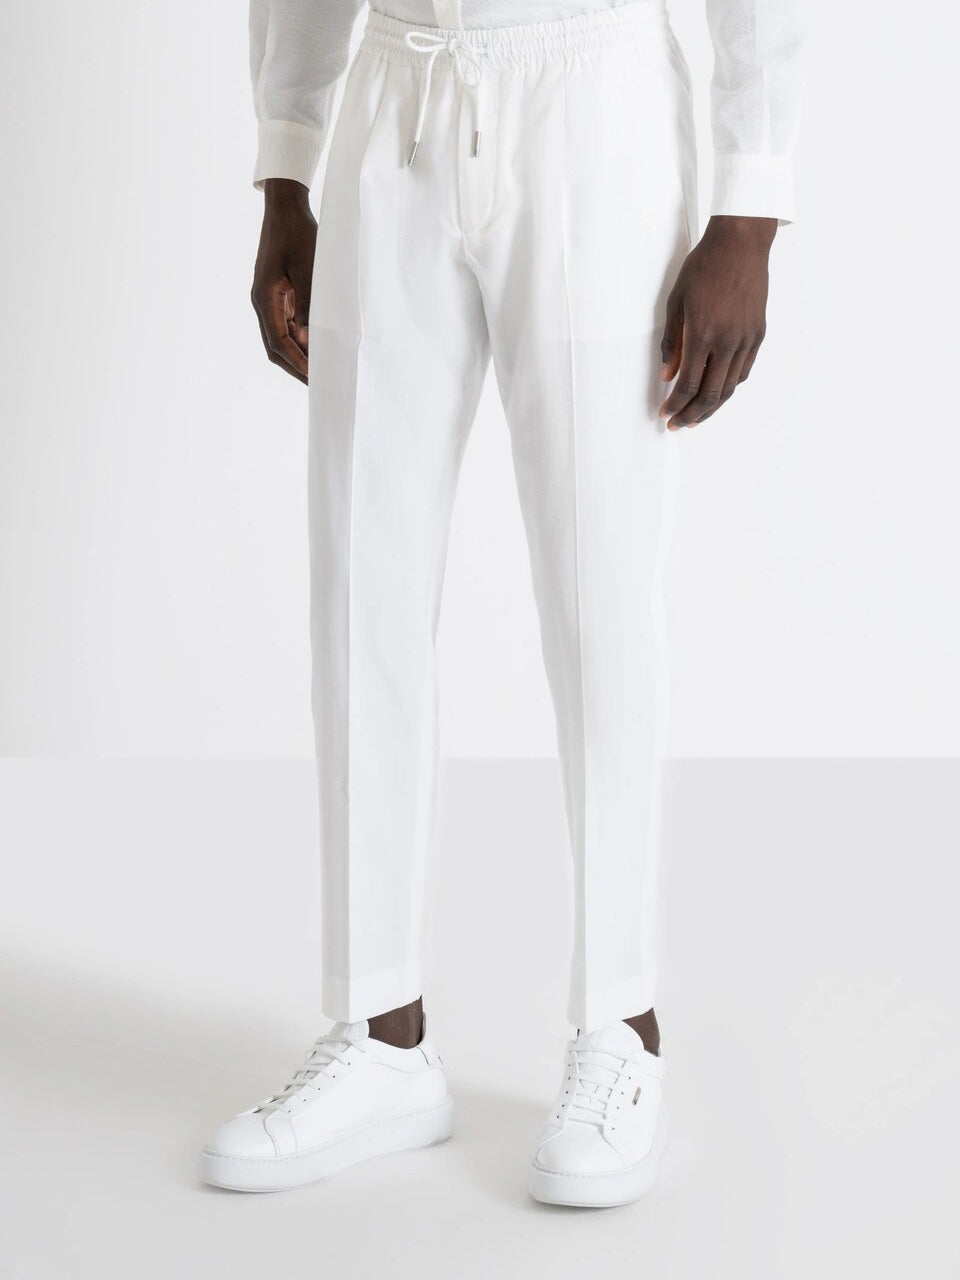 Antony Morato boys' trousers carrot fit in in twill cotton